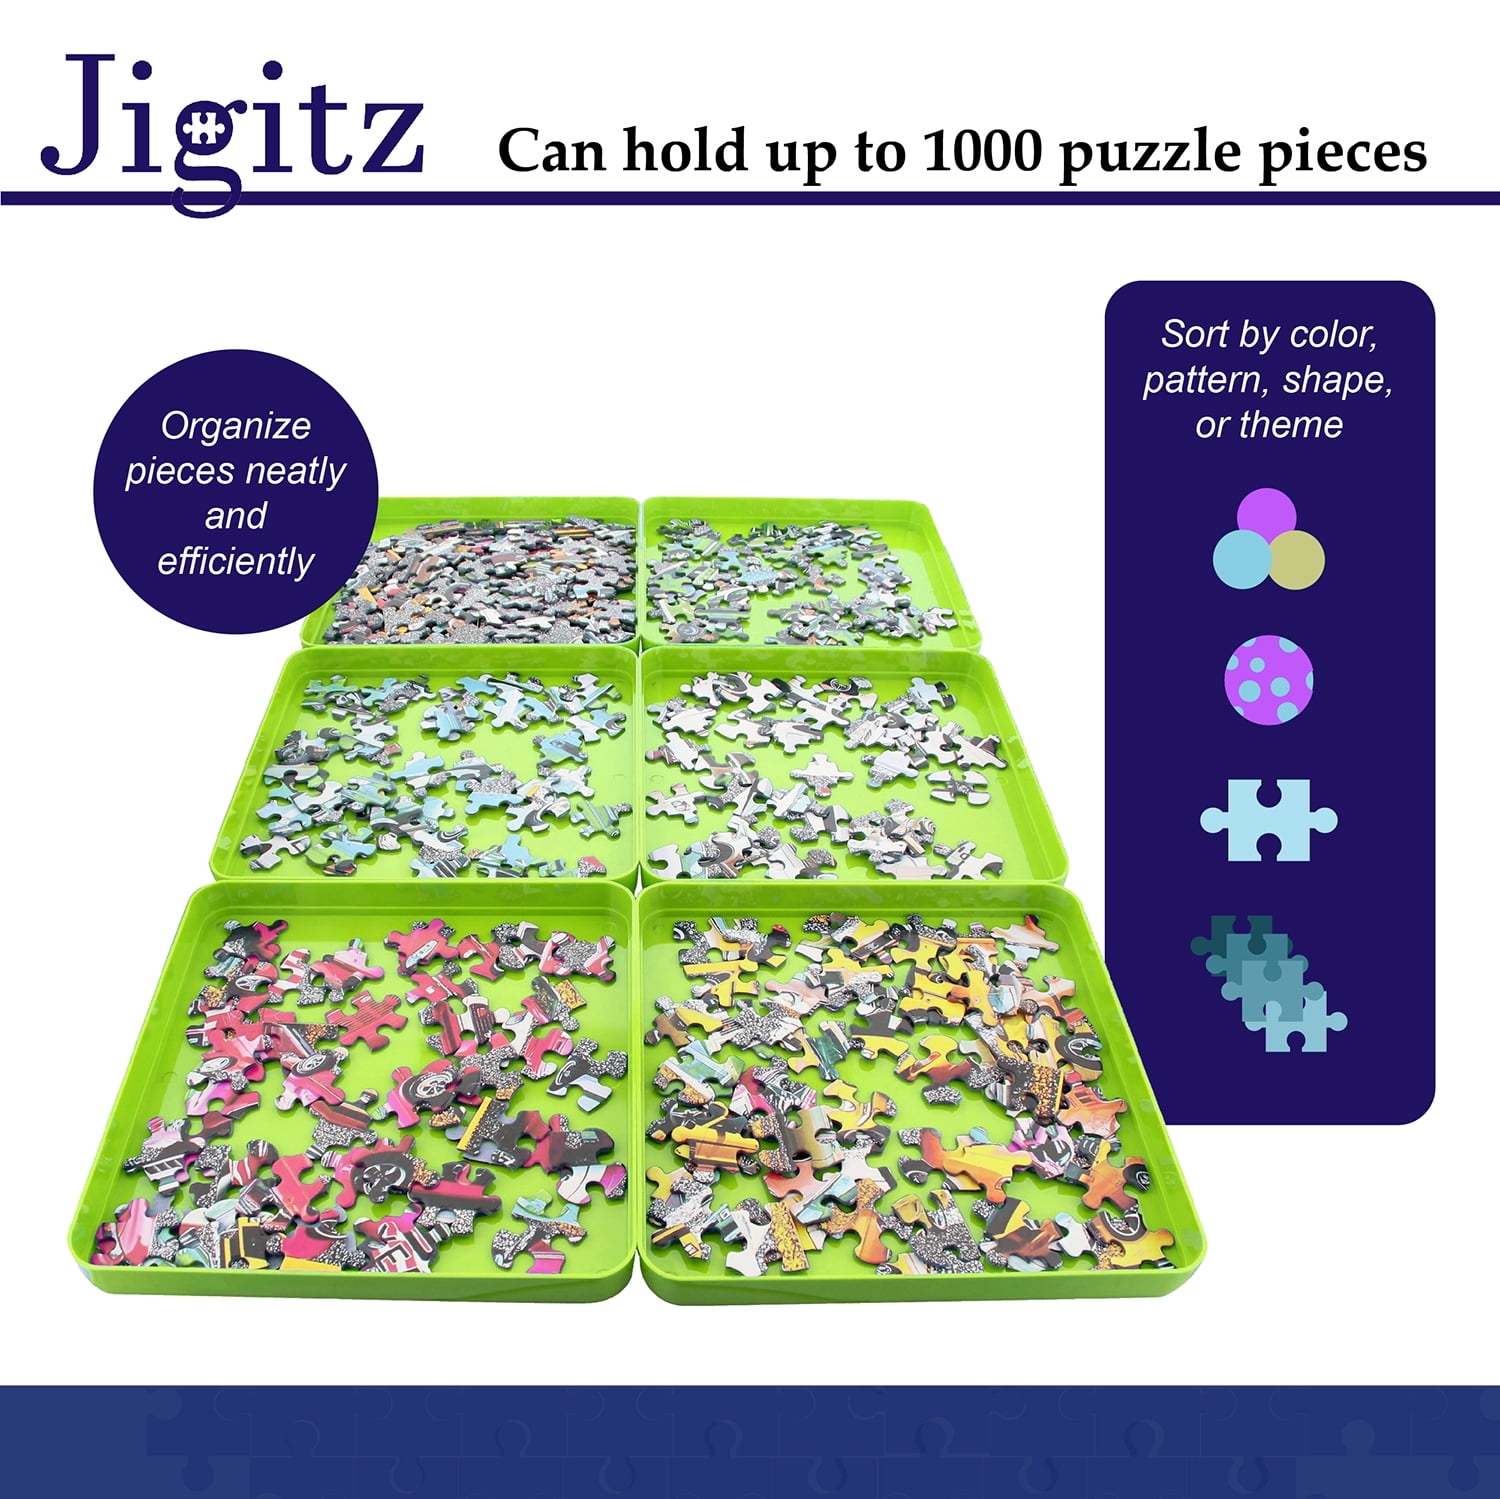  Jigitz Jigsaw Puzzle Sorter Trays in Green - 6 Pack Plastic  Puzzle Organizer Puzzle Stacking Trays for Large Puzzles : Toys & Games